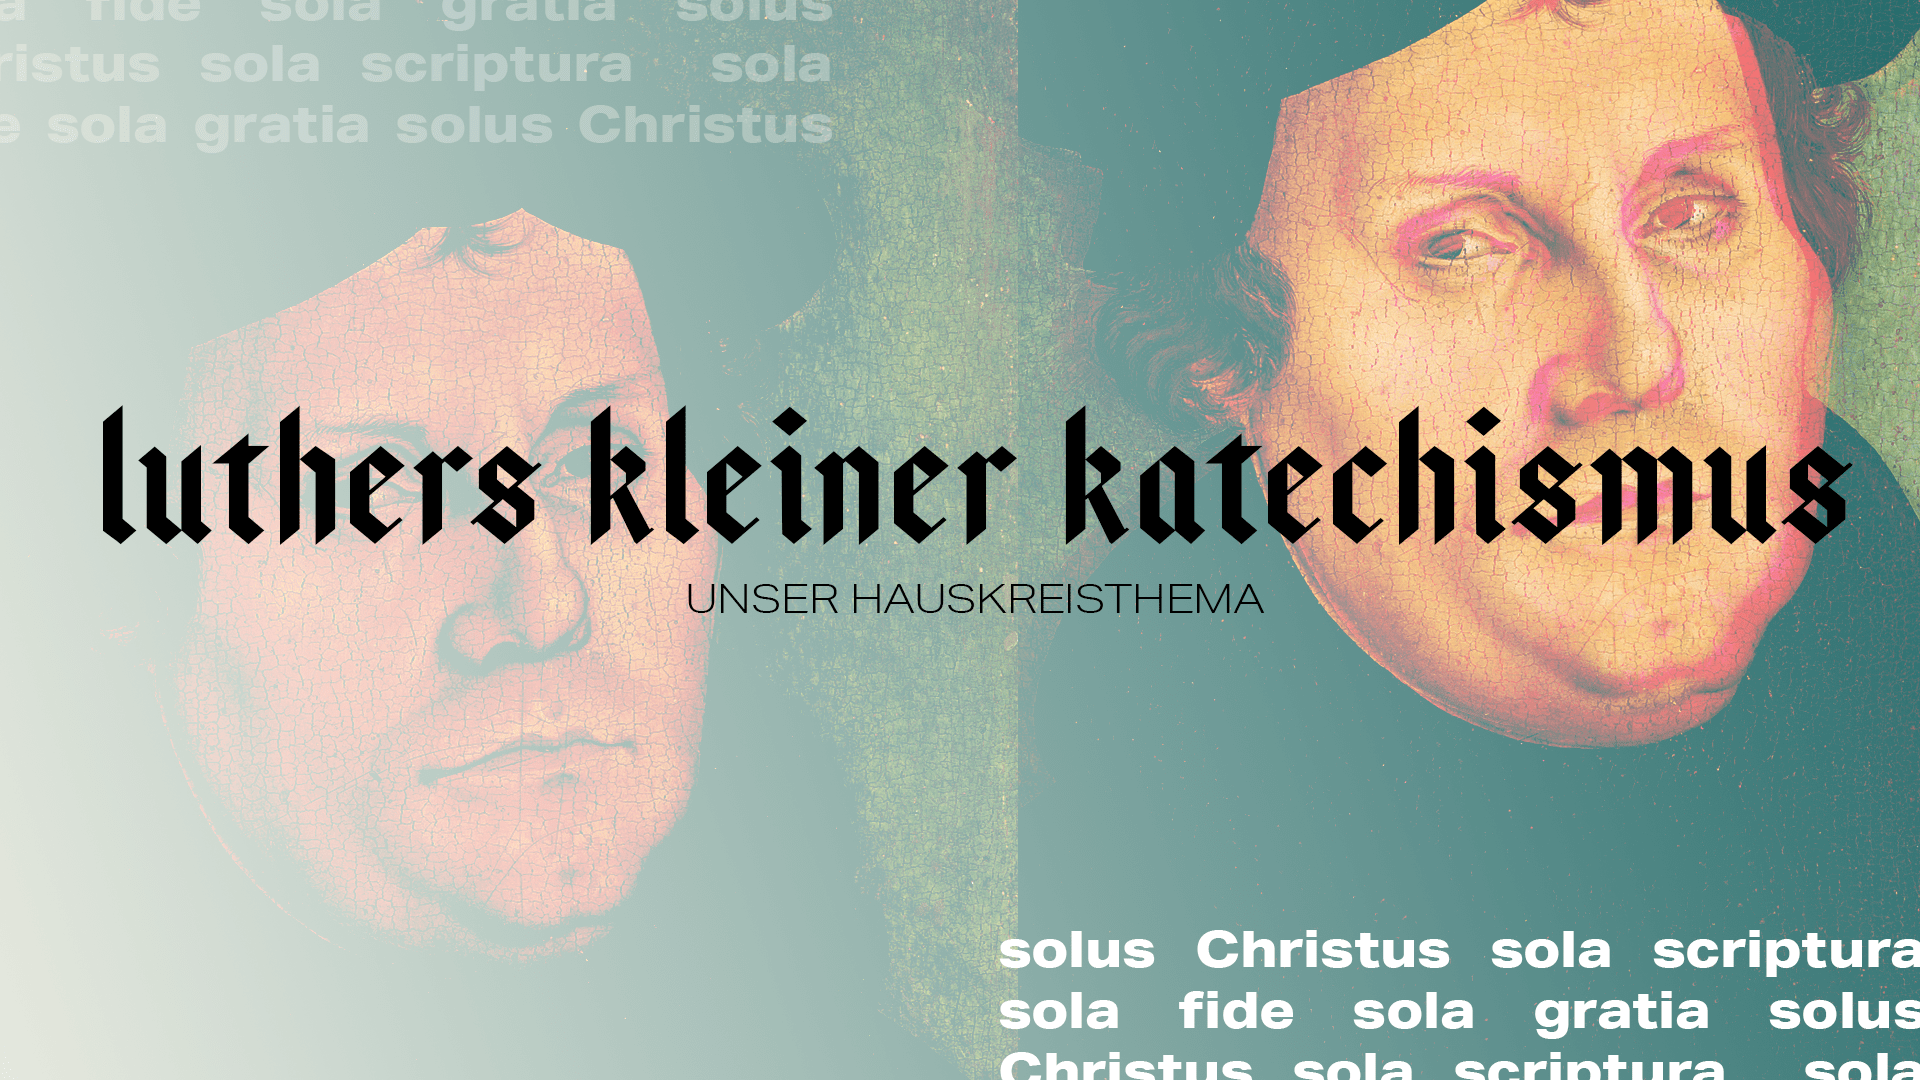 Luther Kleiner Katechismus